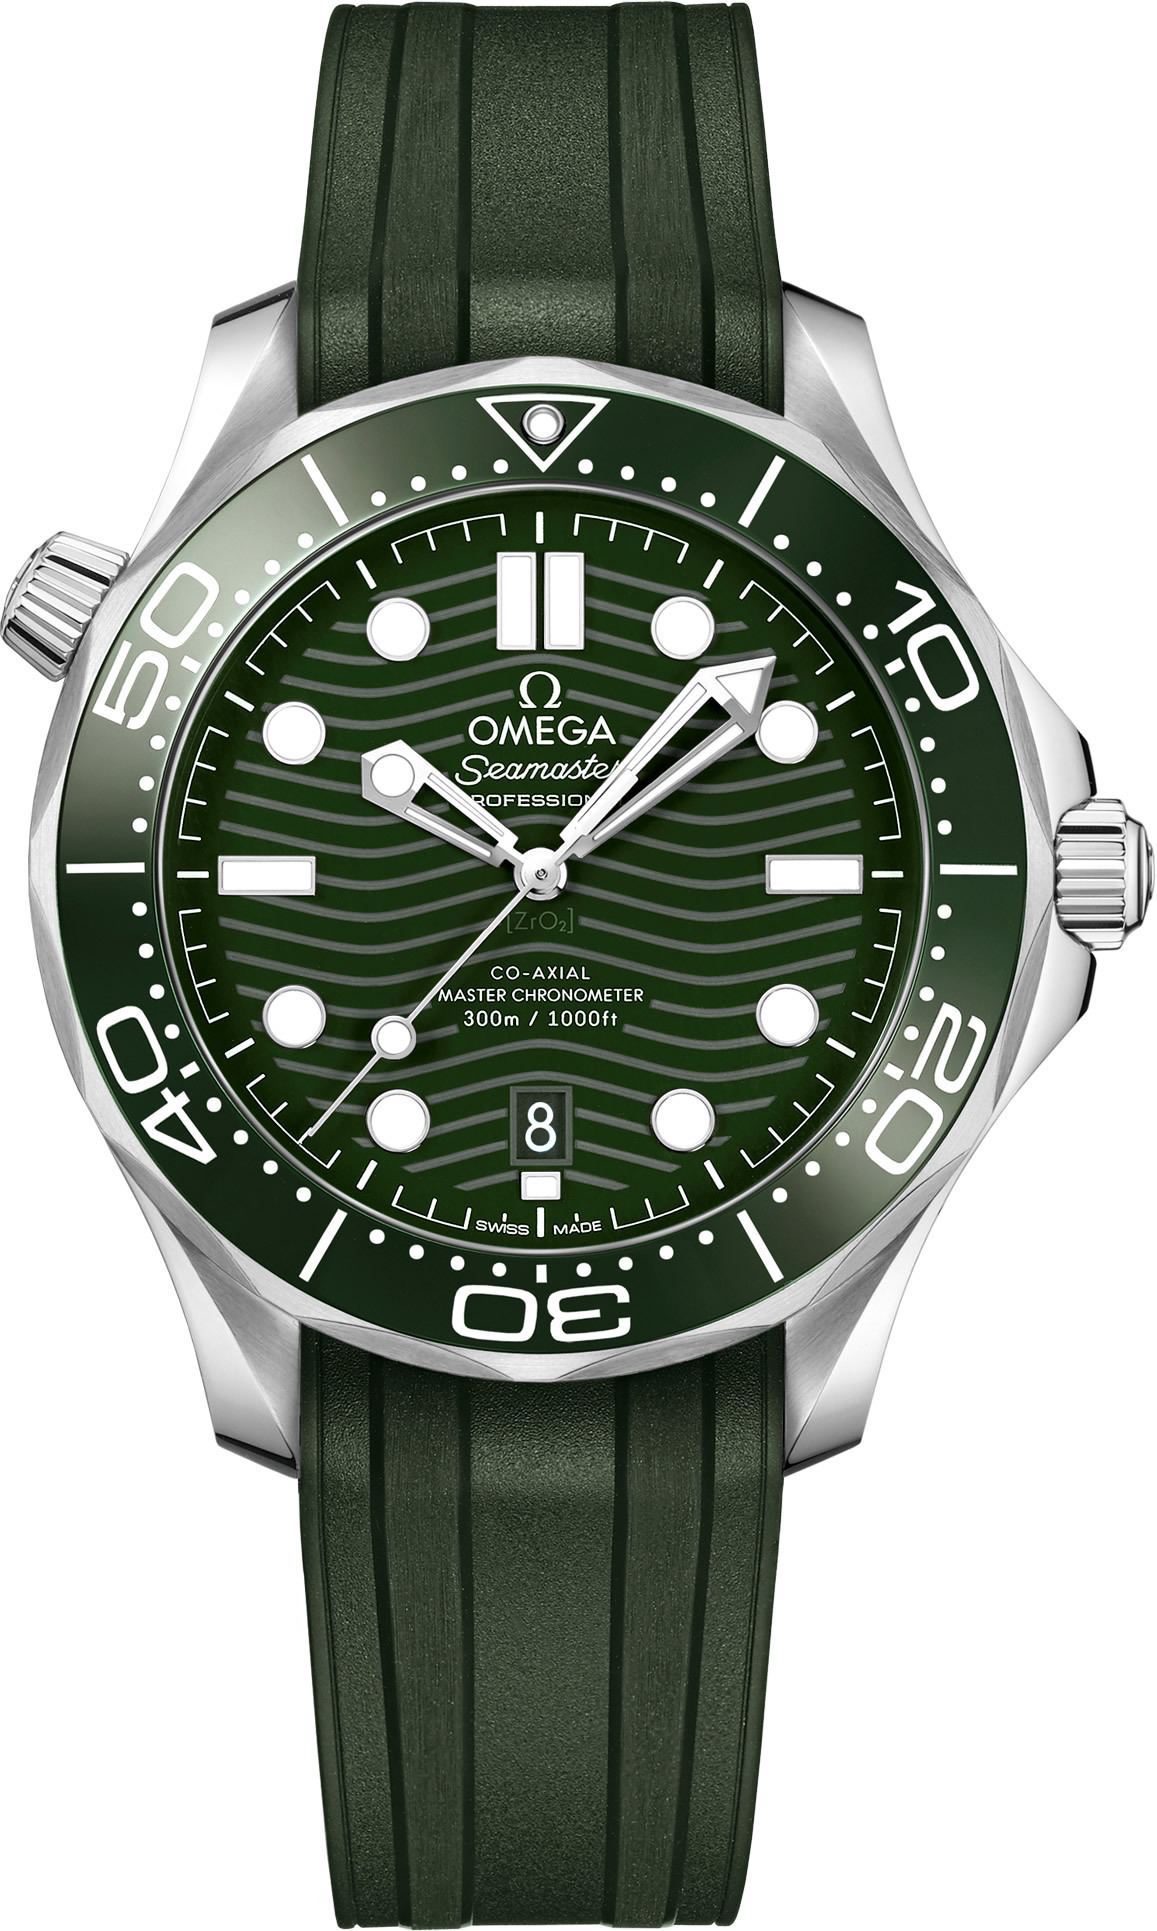 Green Omega Seamaster Diver 300m Professional Video Review